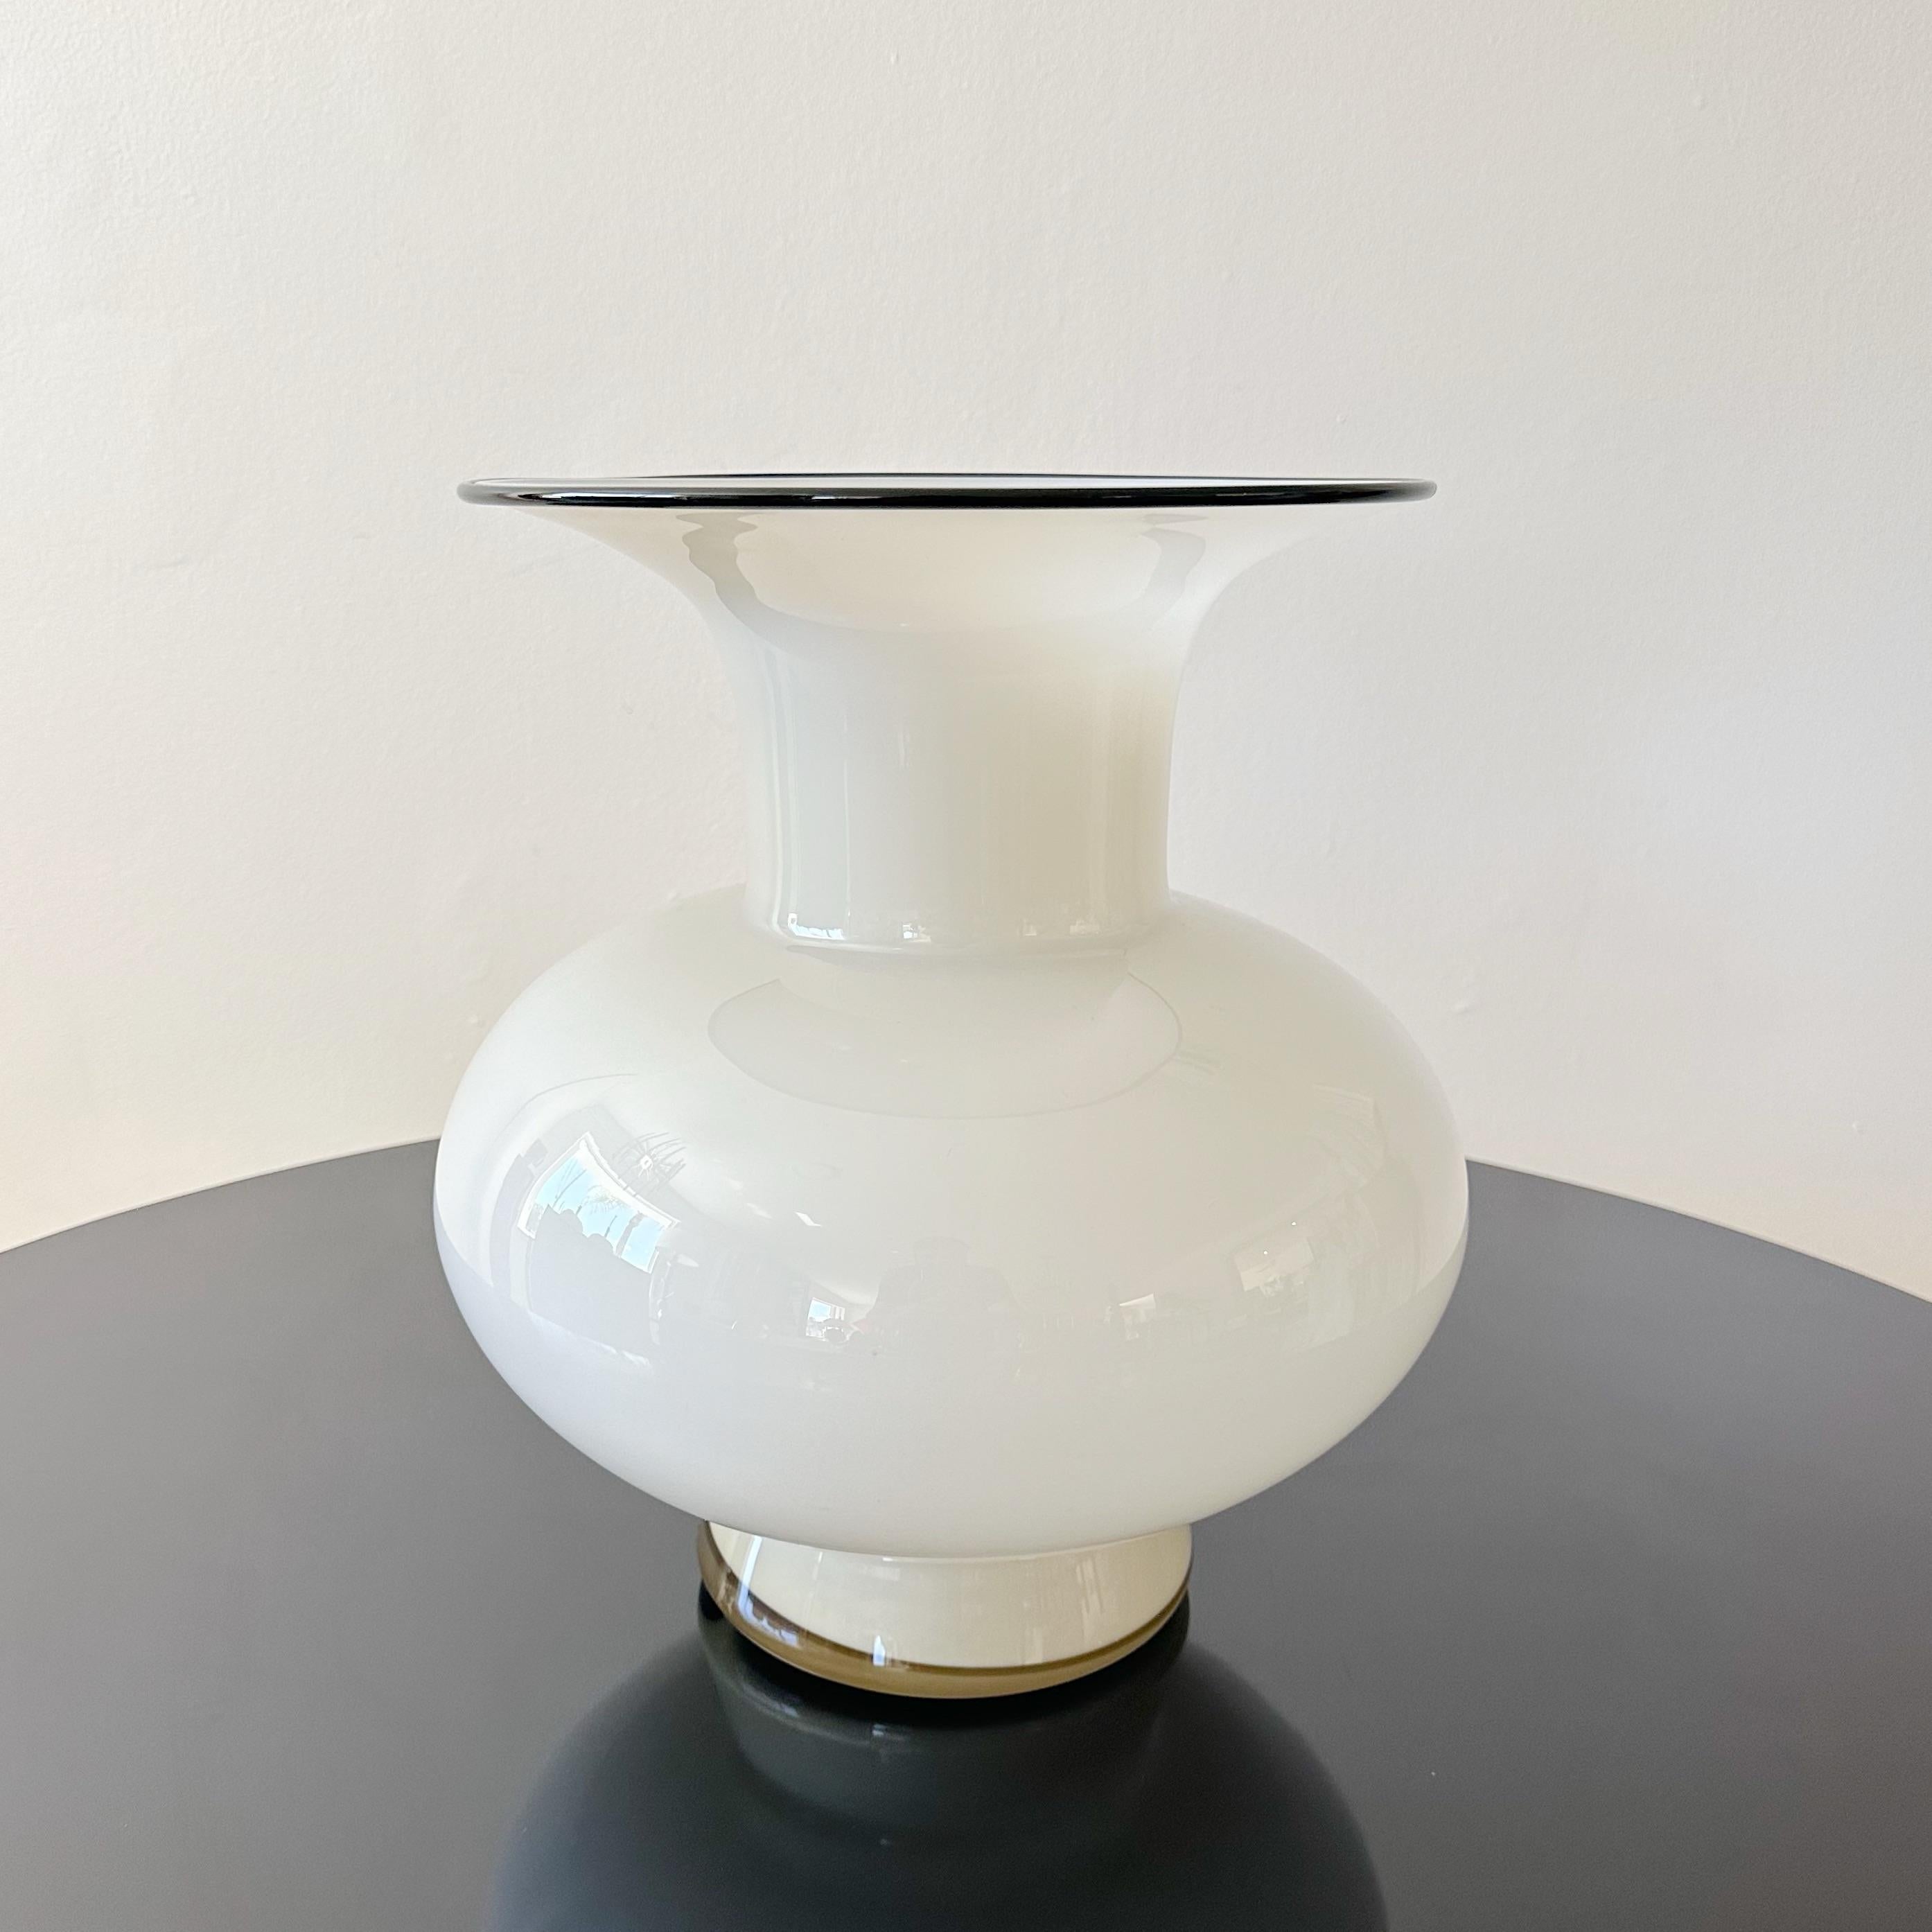 Loetz Bohemian vase crafted by Michael Powolny during the 1920s. This piece from the early 20th century showcases an exceptional size uncommon for Powolny. Adorned in a cream hue, accentuated by an applied black glass rim. The opening of the vase is